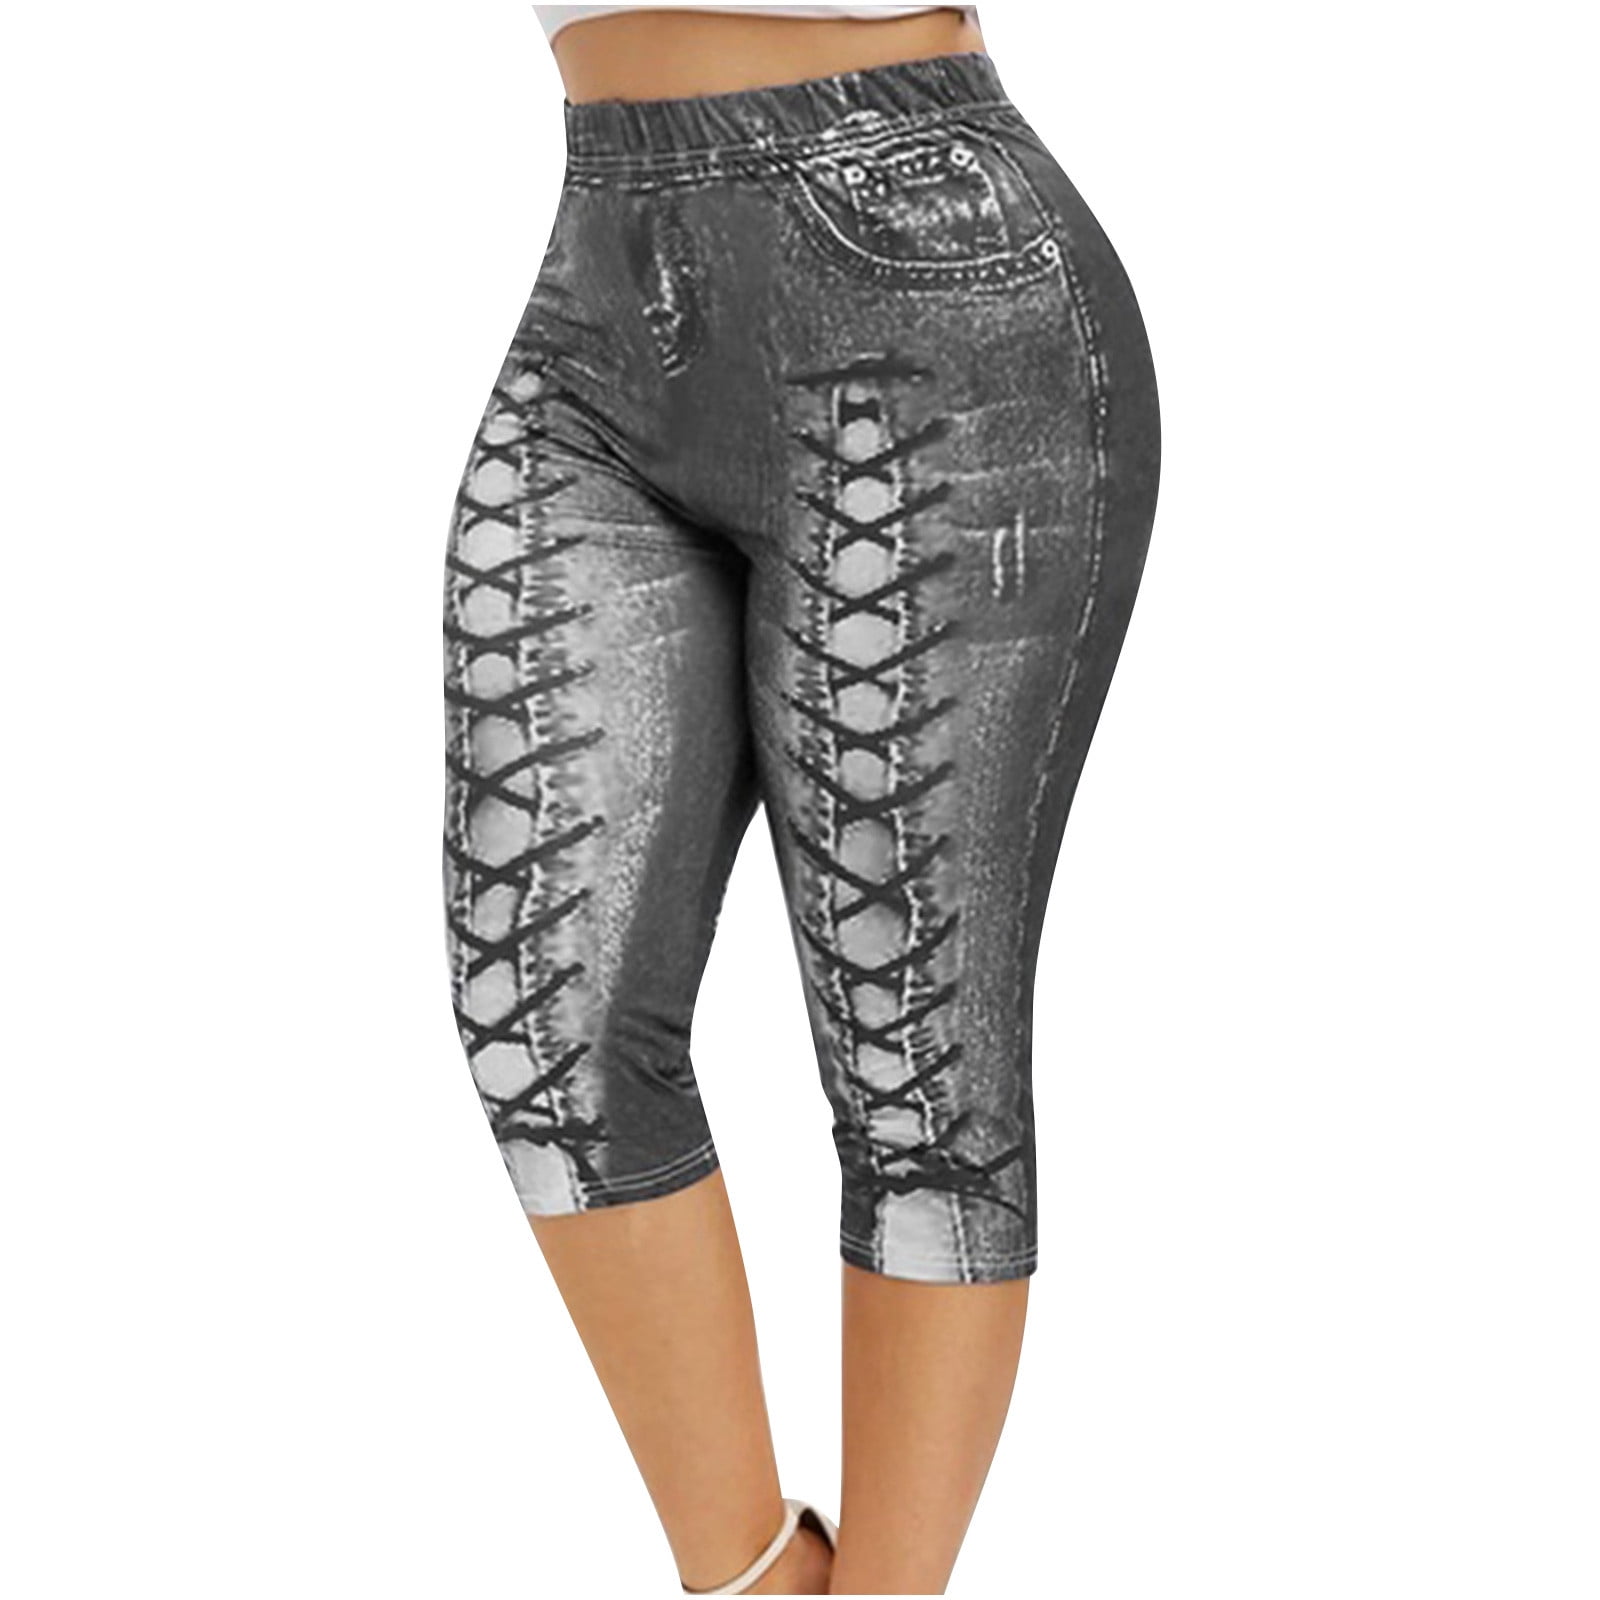 Women's Pants, Jeans and Capris. Sizes 16-20 - clothing